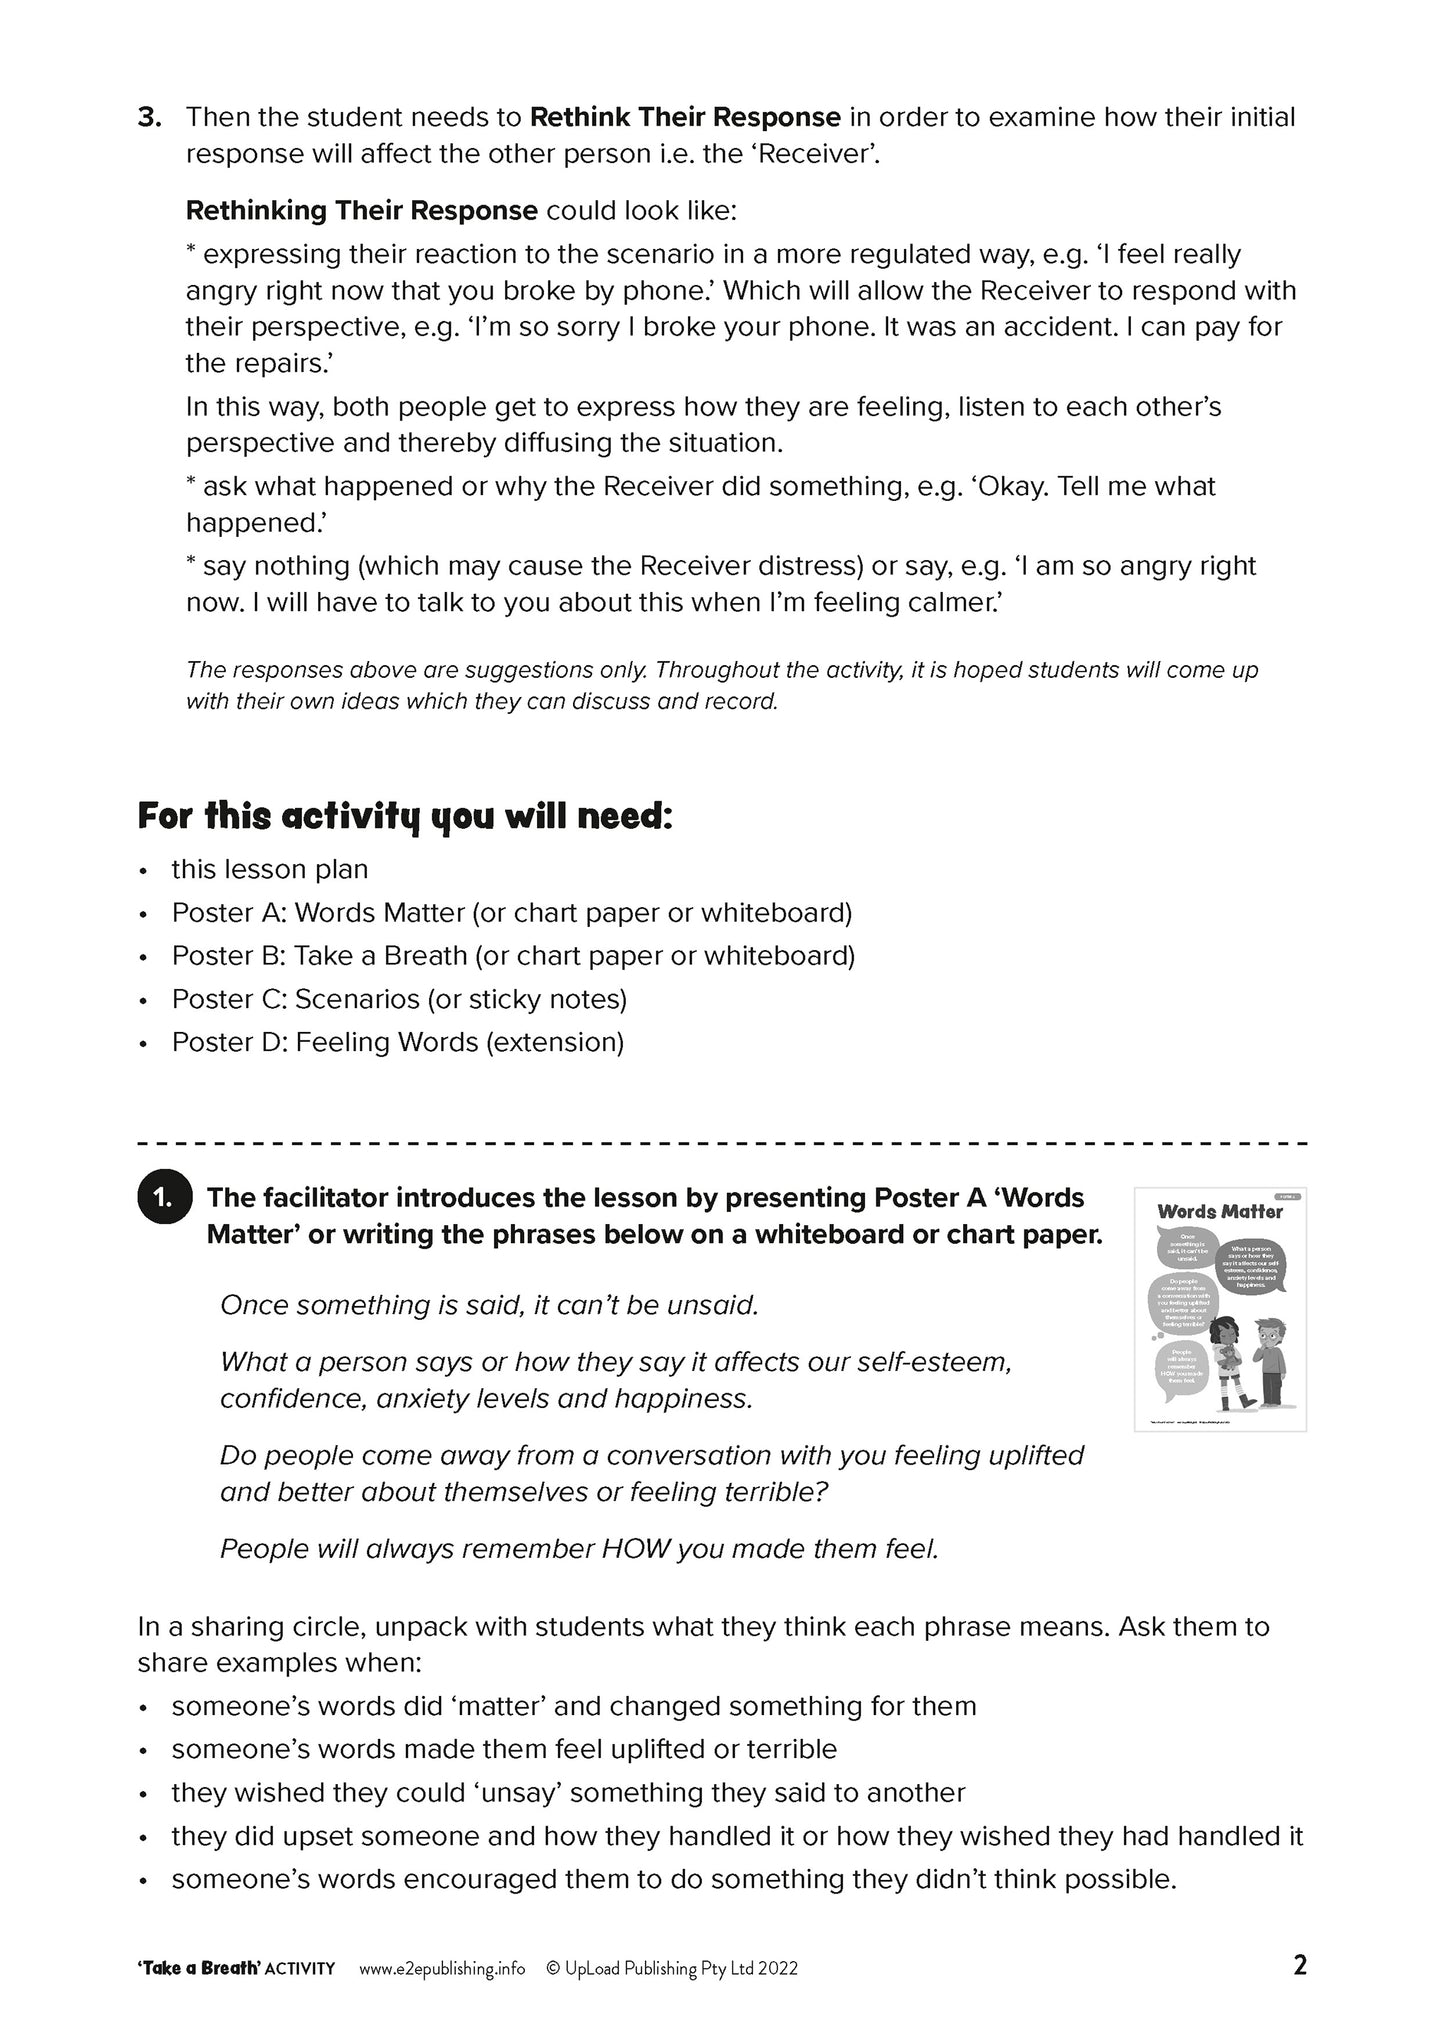 Page two of the activity sheet collection title 'Take A Breath'.